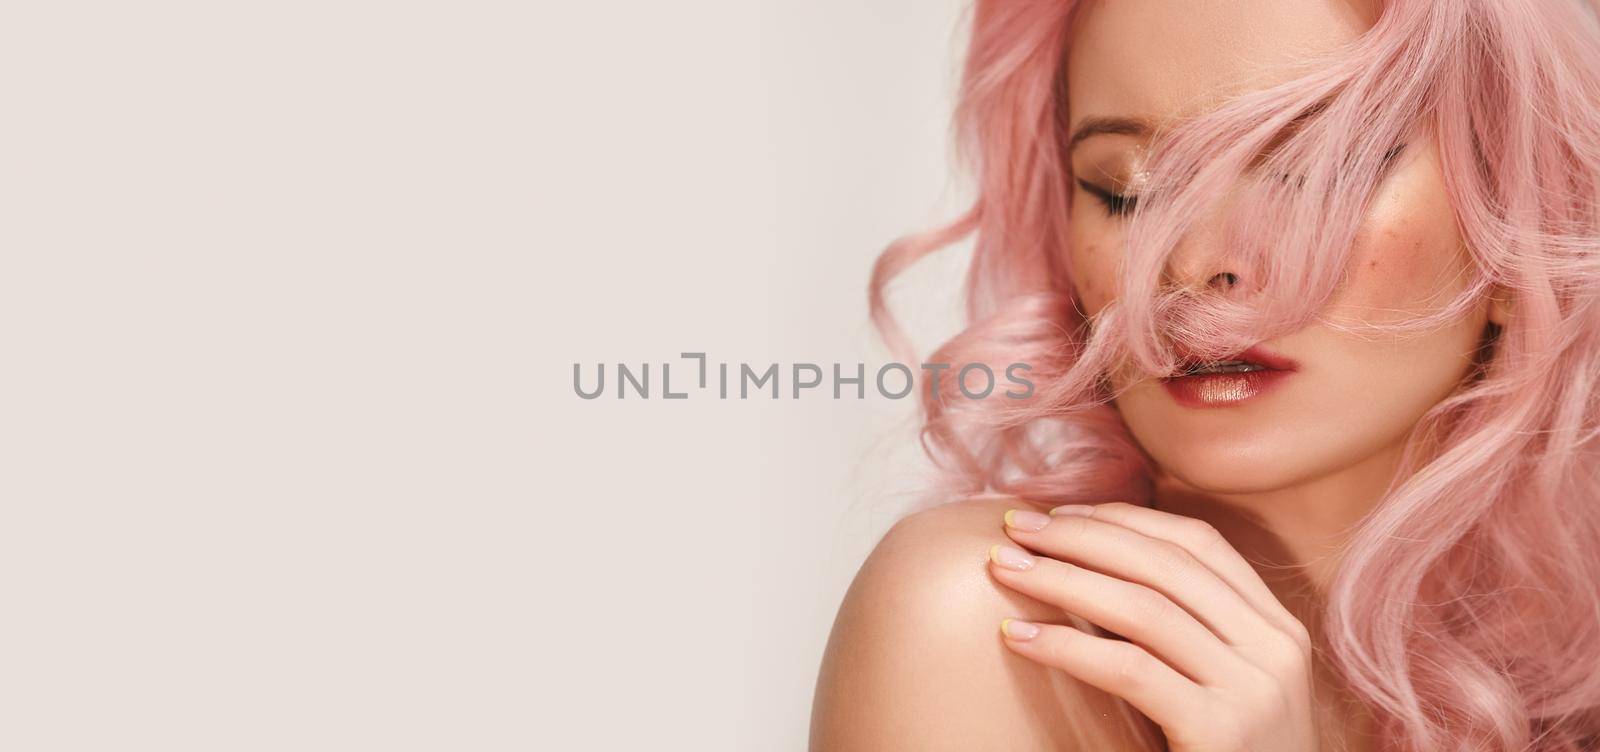 Soft-Girl Style with Trend Pink Flying Hair, Fashion Make-up. Woman with Freckles, Blush Rouge, Rose Colored Hairstyle by MarinaFrost